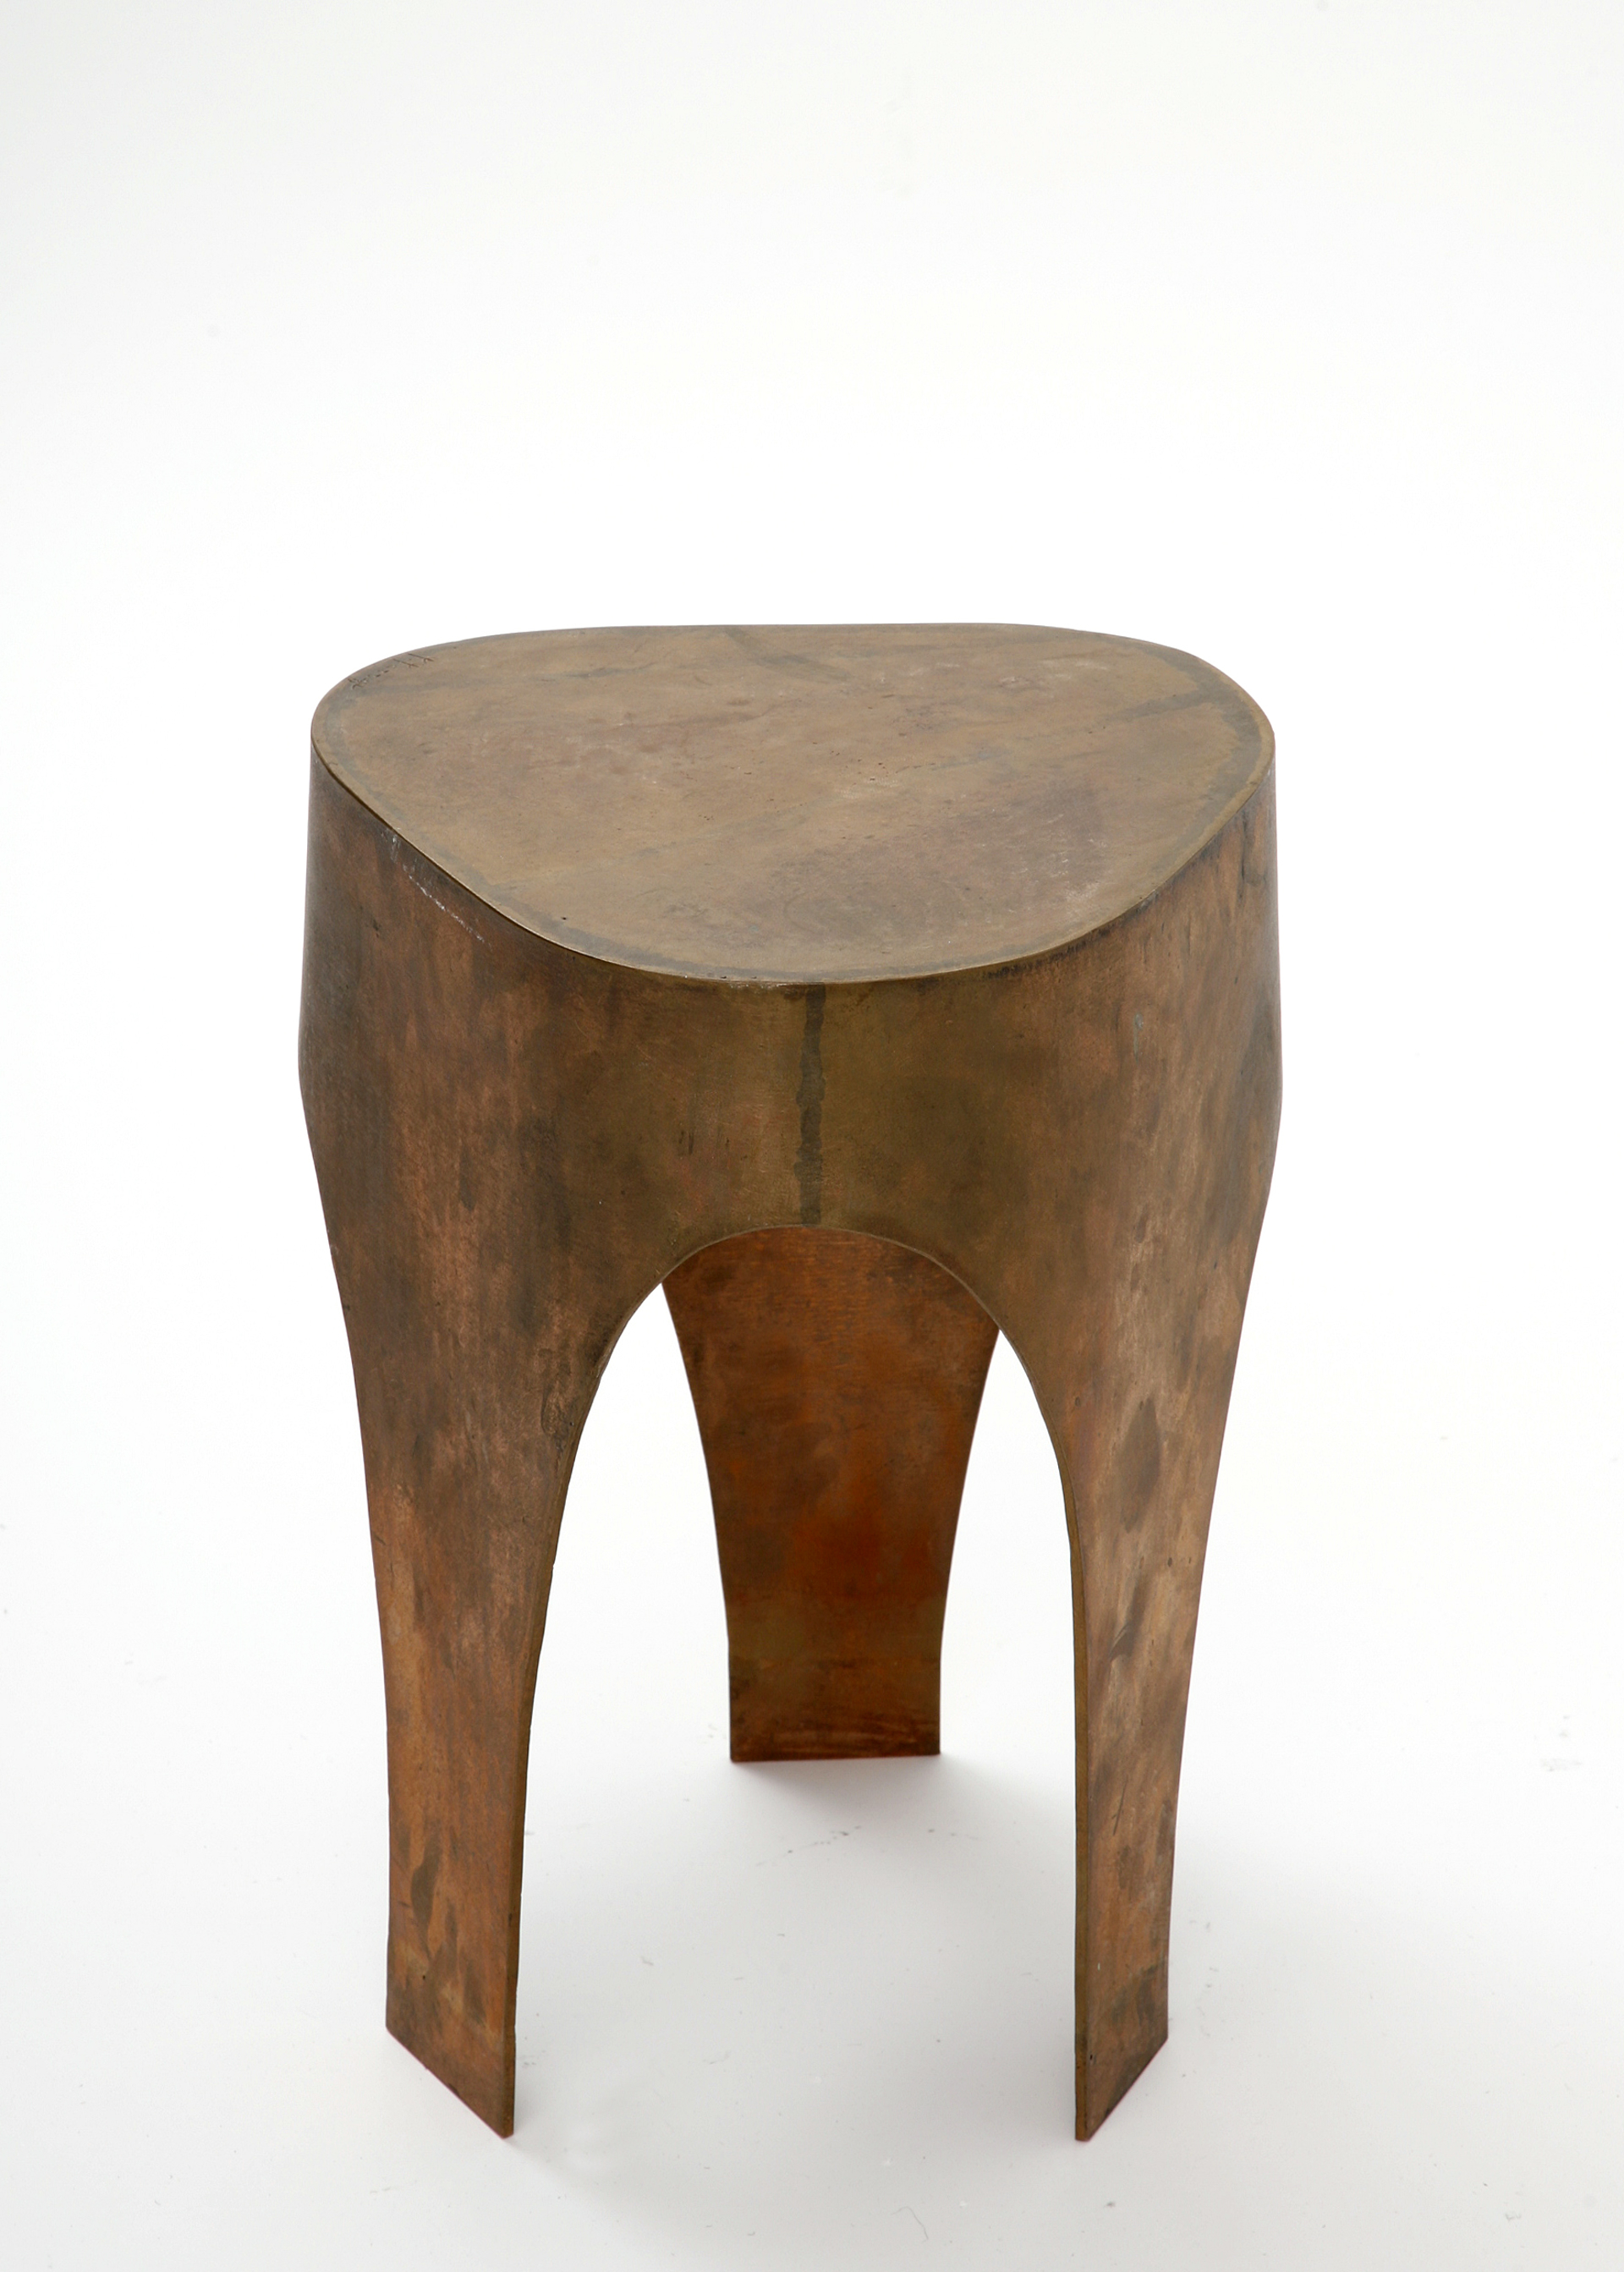 "Odalisque" Bronze stool by Jacques Jarrige